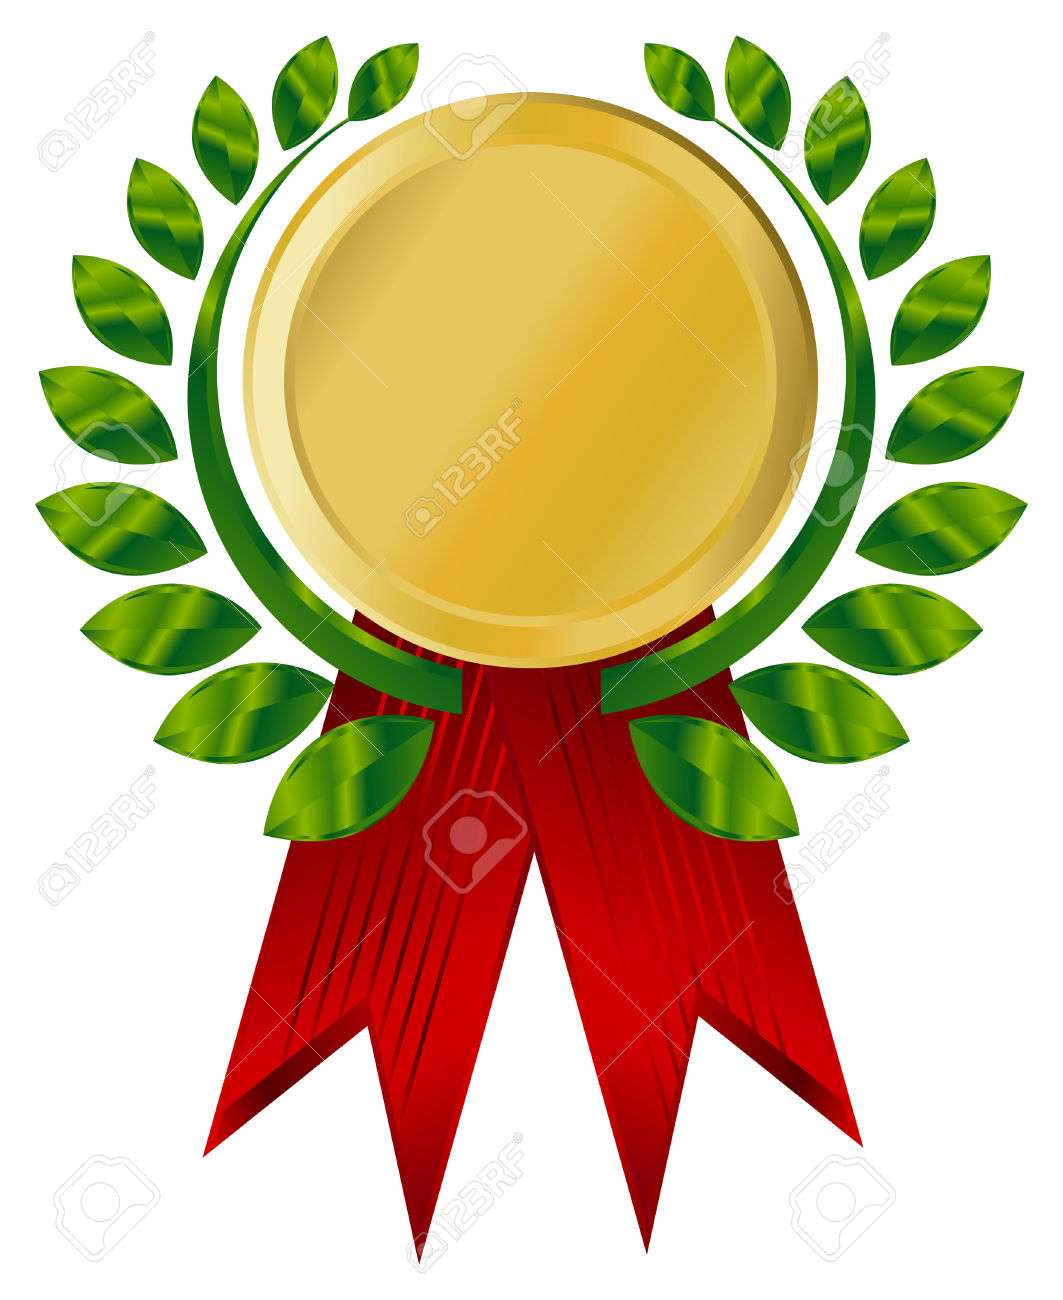 Awards clipart recognition.